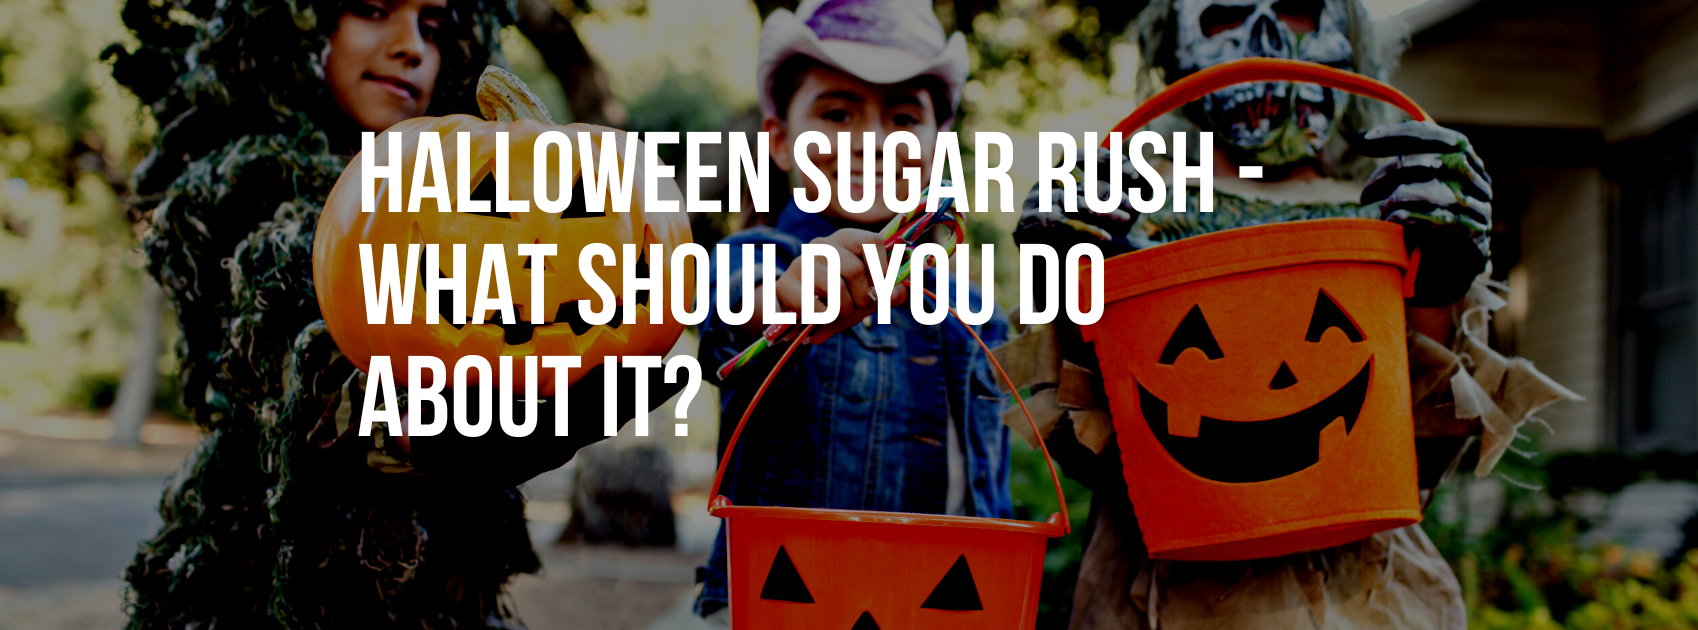 Halloween Sugar Rush – What Should You Do About It?